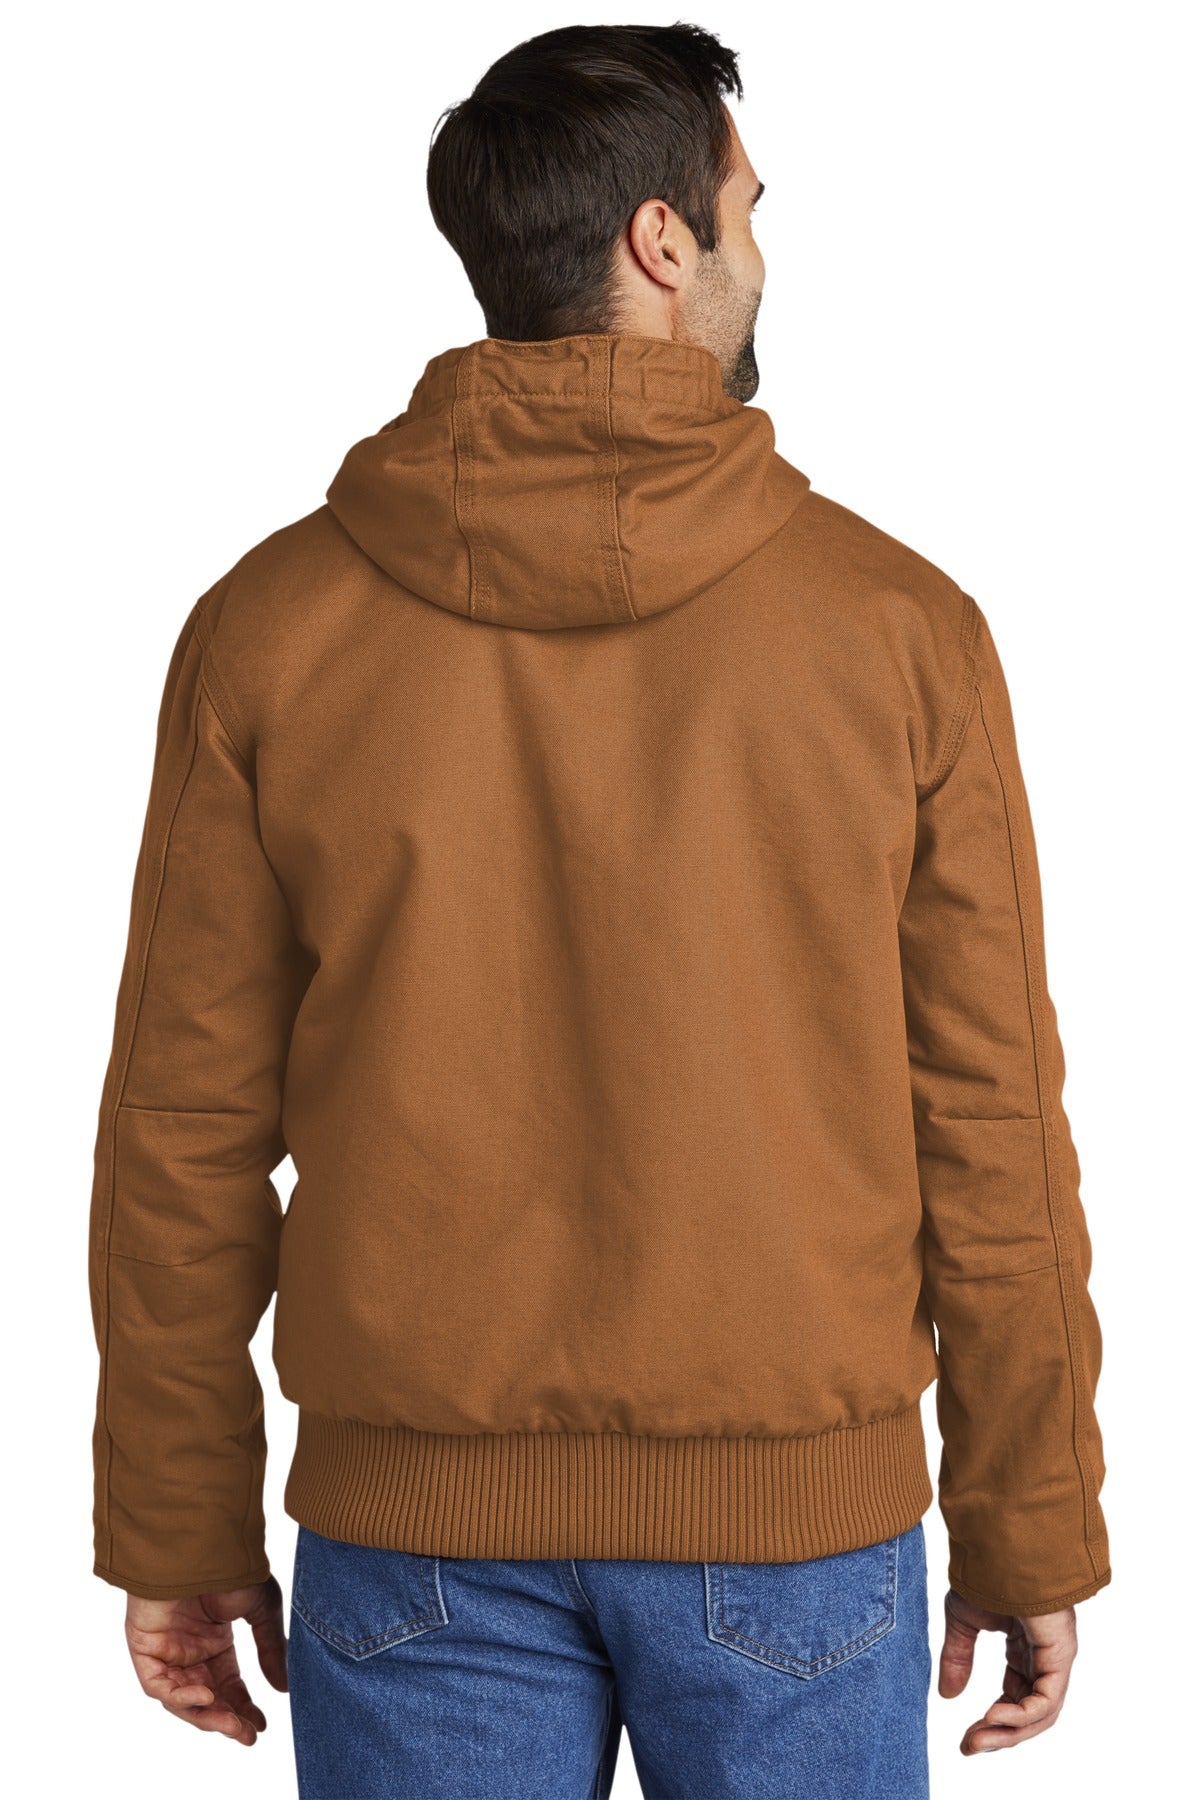 Carhartt Washed Duck Active Jac. CT104050